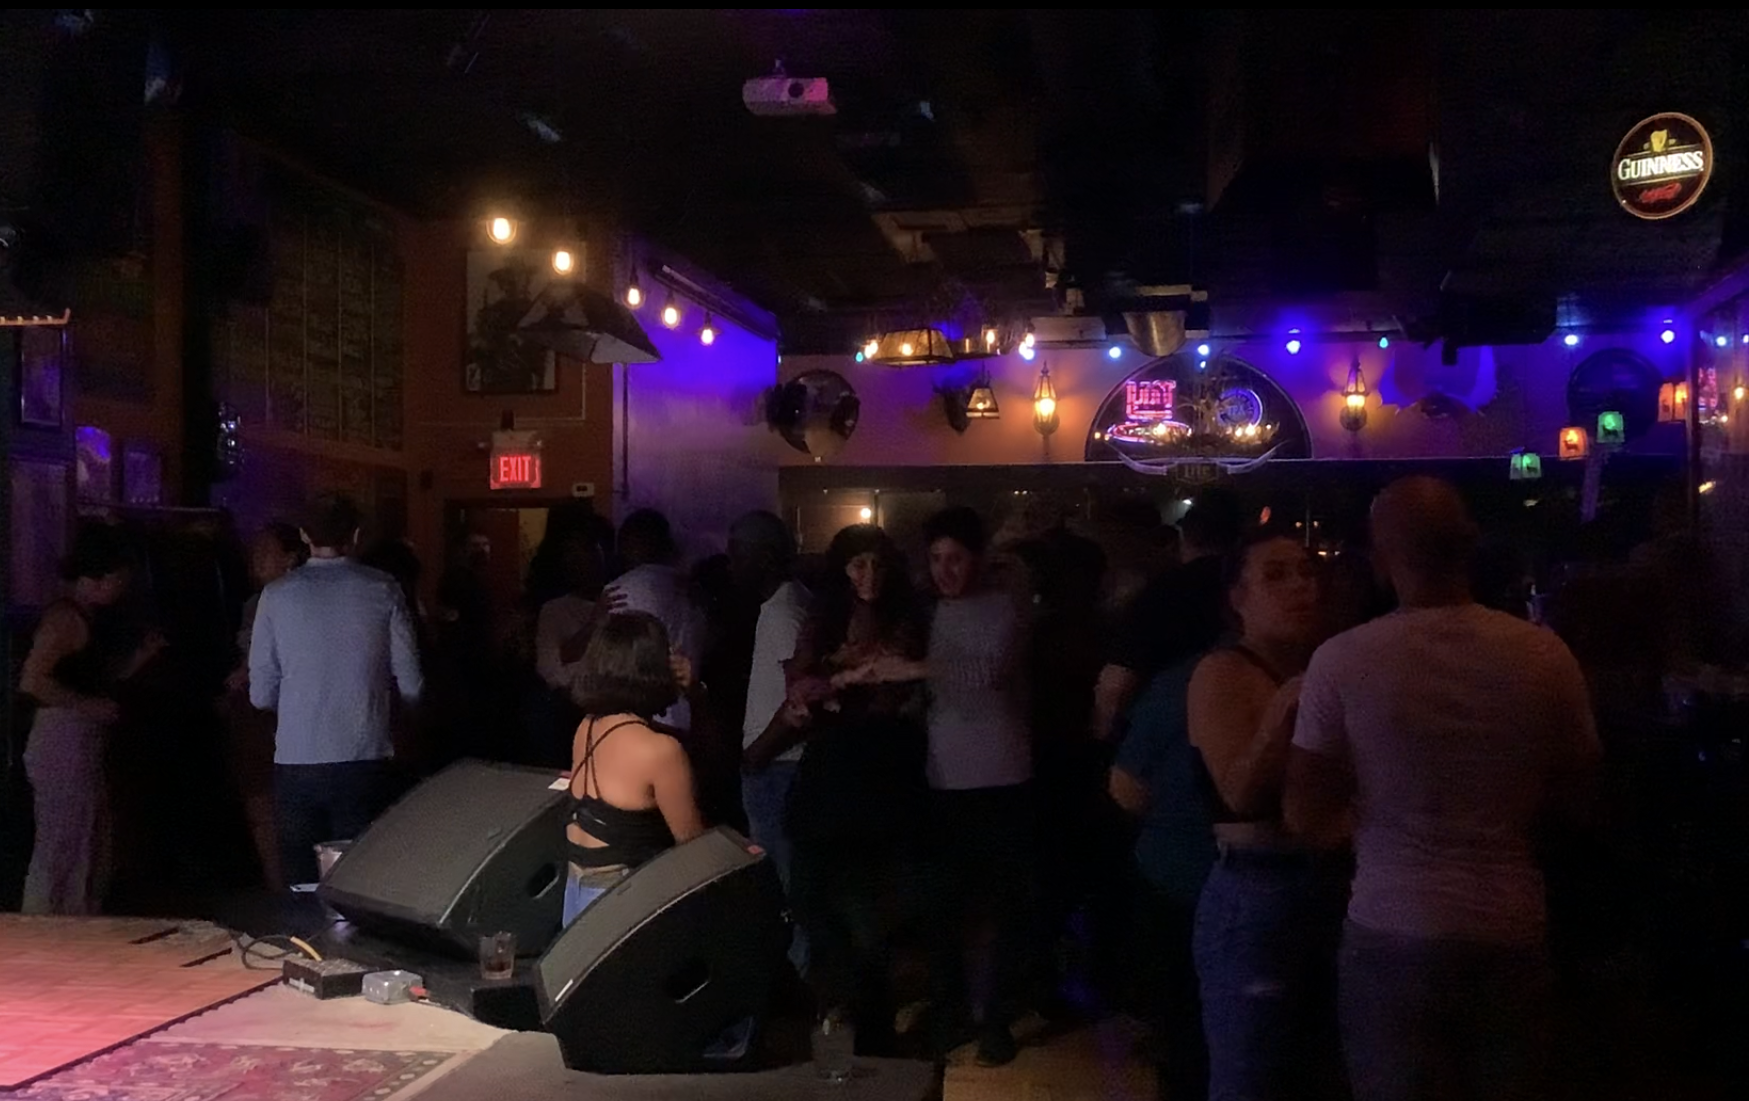 people fill the inside of The Range, a country and western bar. The dance to salsa music in the dimly lit room